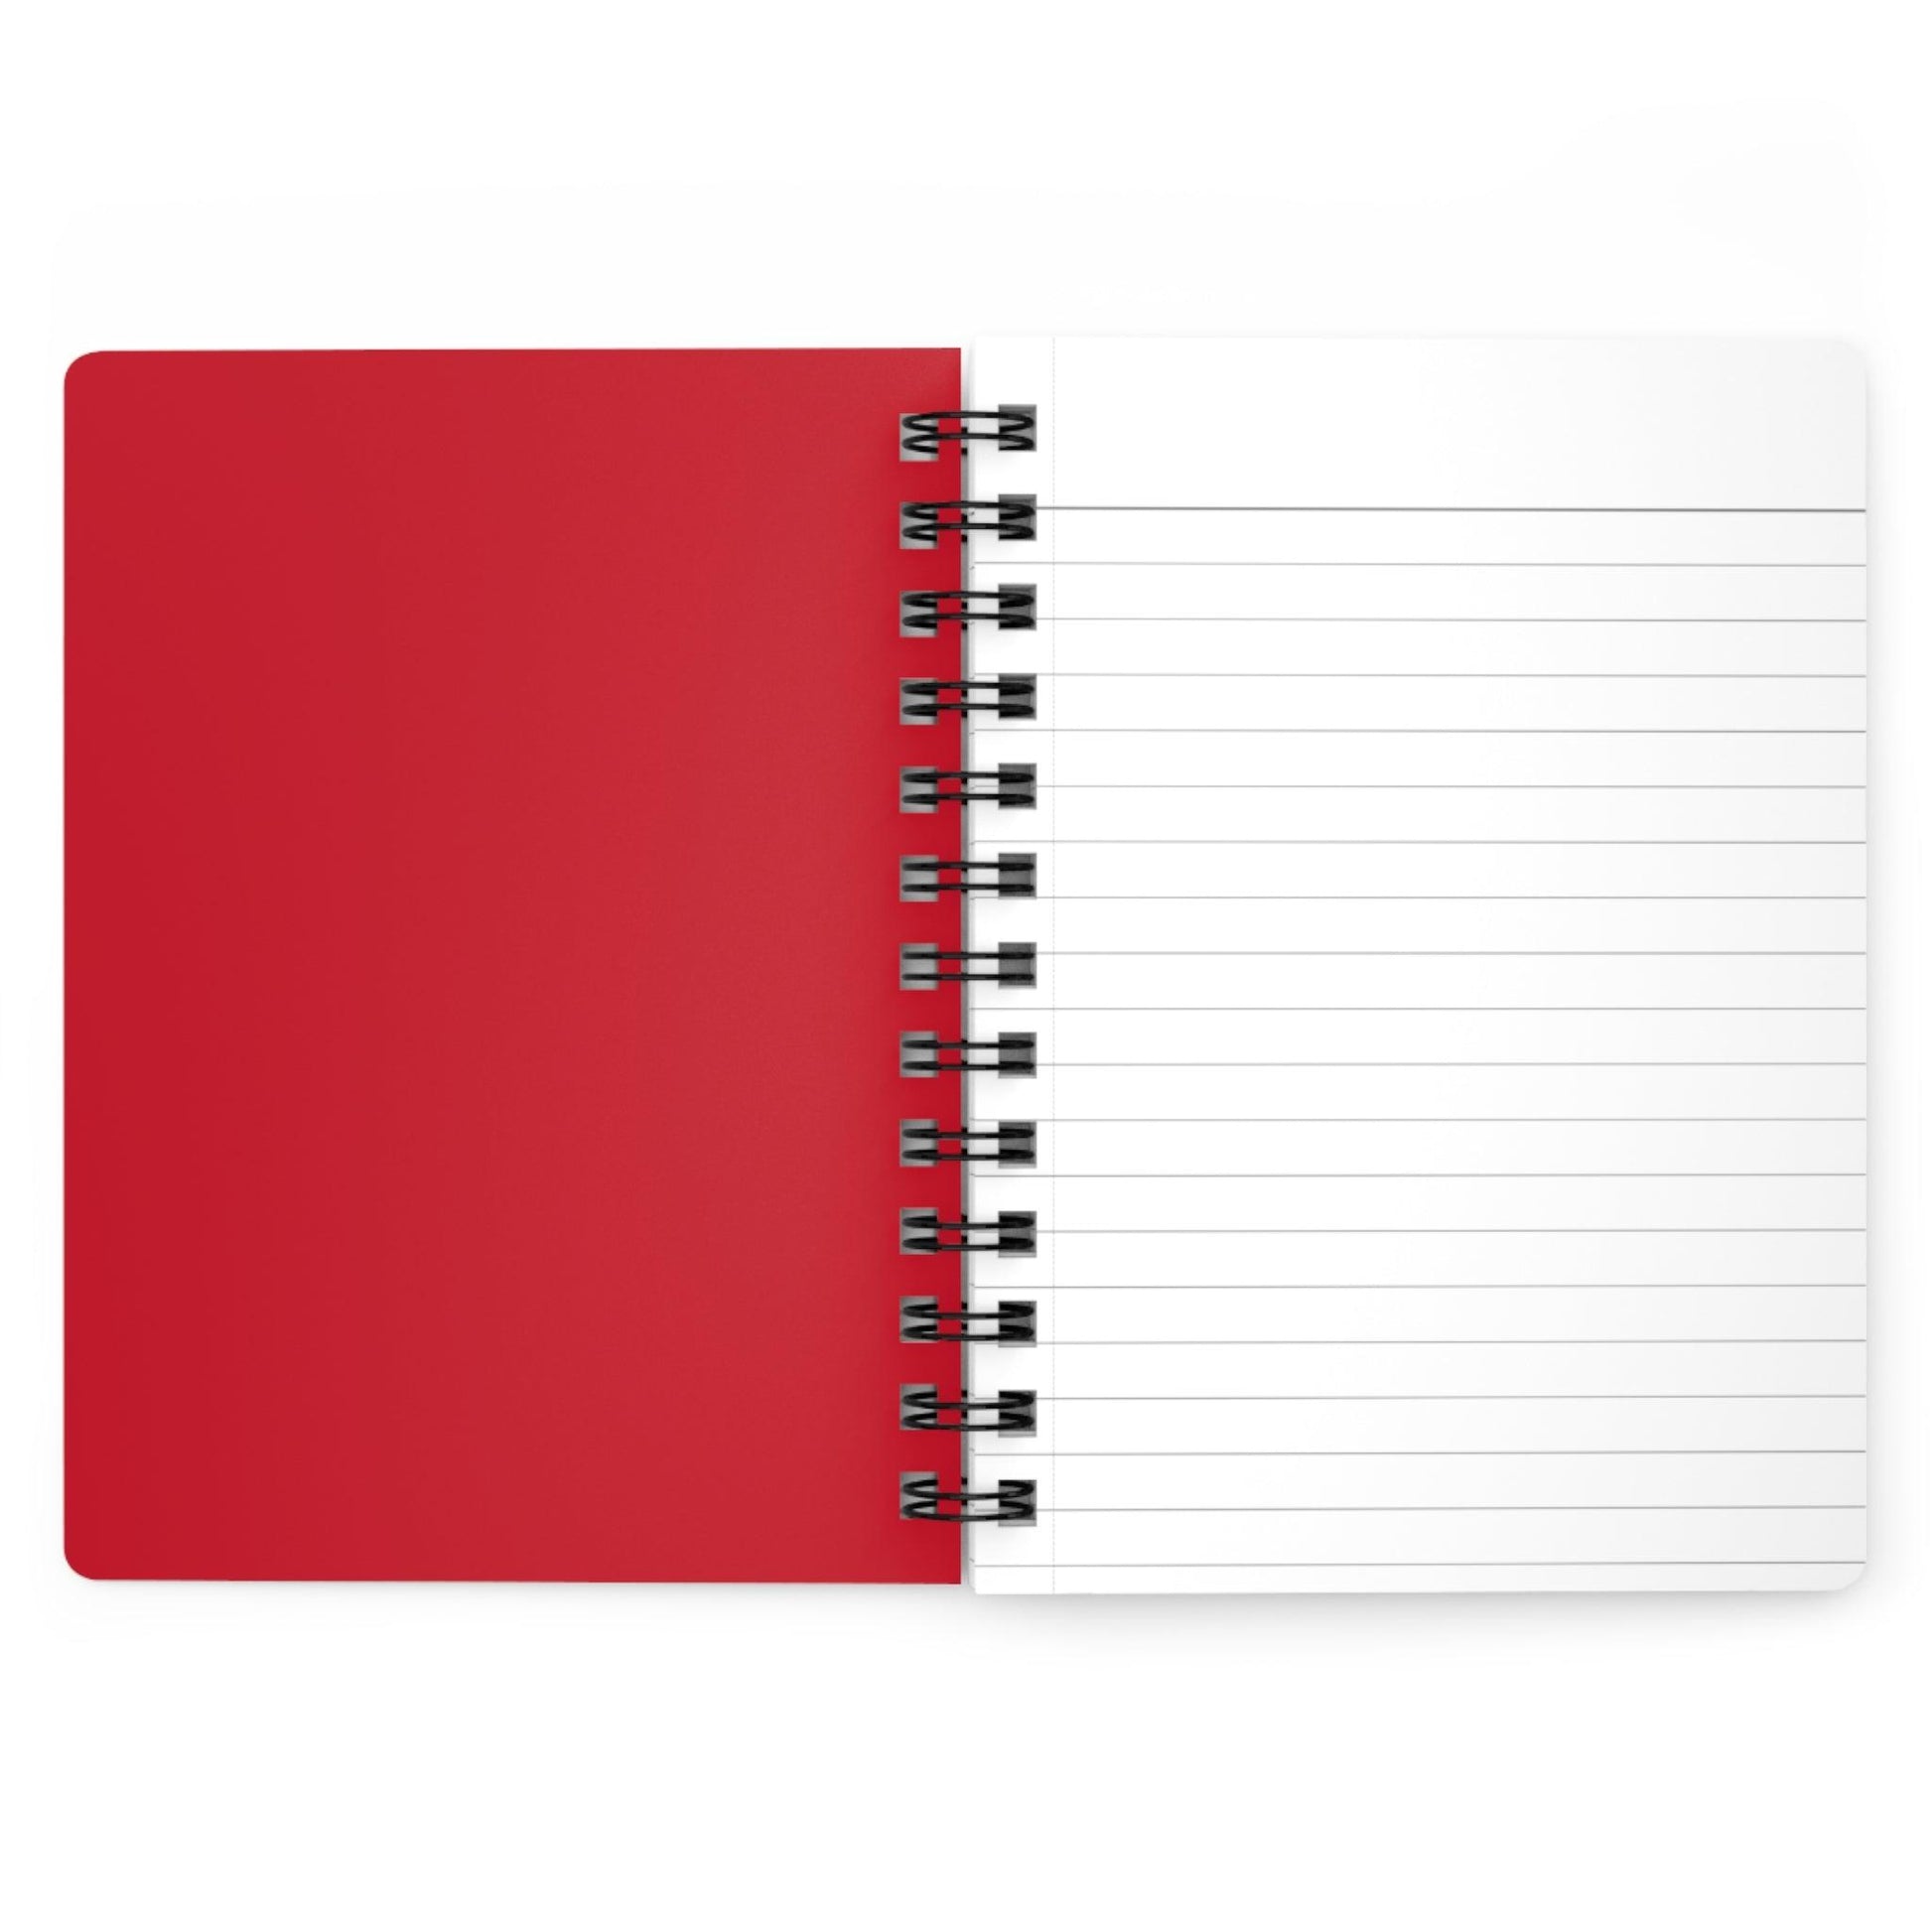 Useless Stuff to Overthink - Spiral Bound Journal - Wicked Naughty Apparel